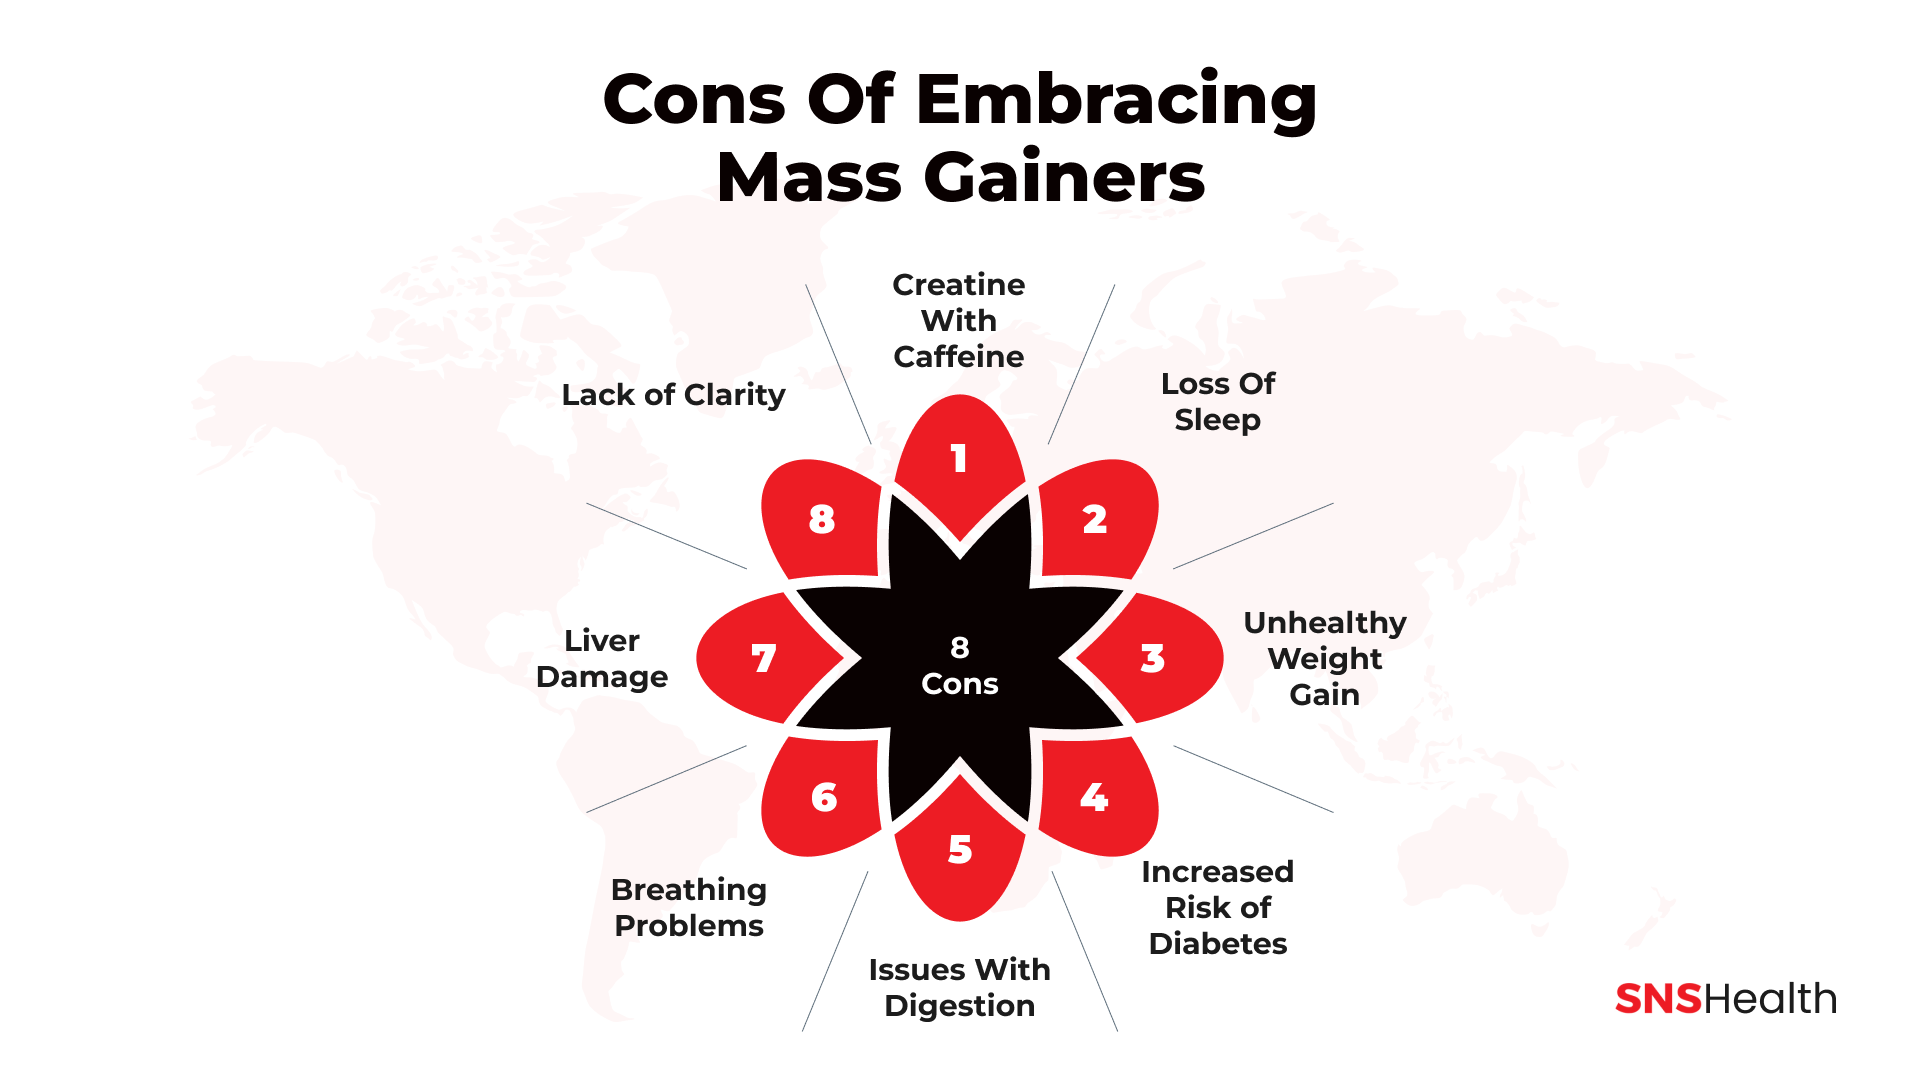 Cons of Embracing Mass Gainers